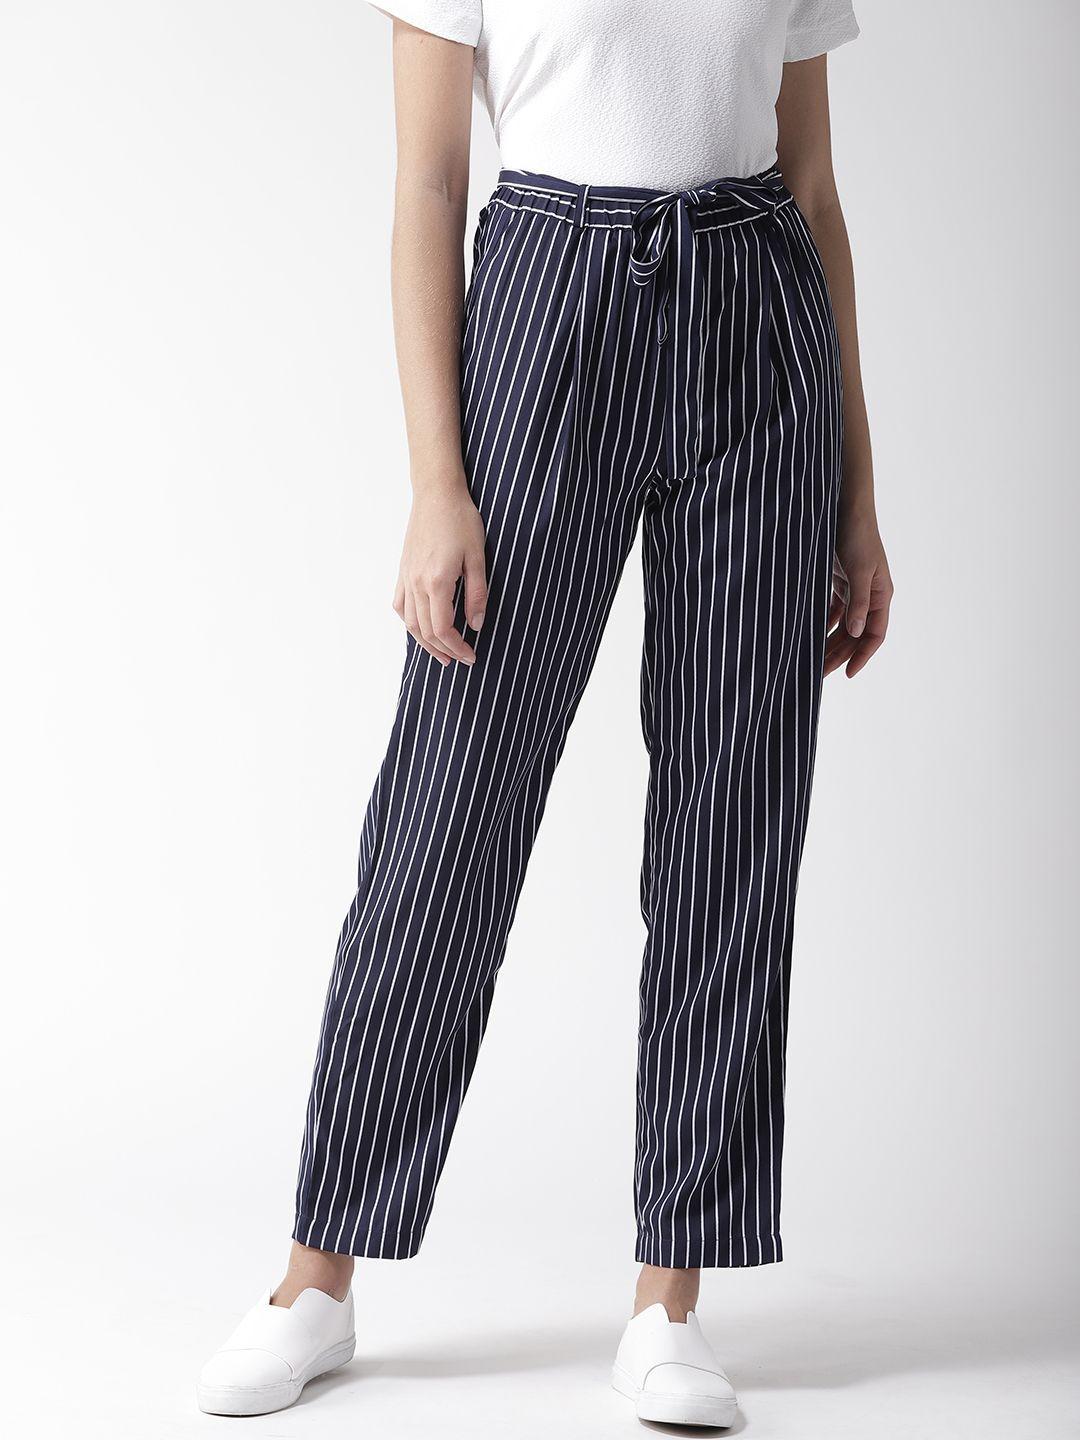 style quotient women navy blue & white slim fit striped regular trousers